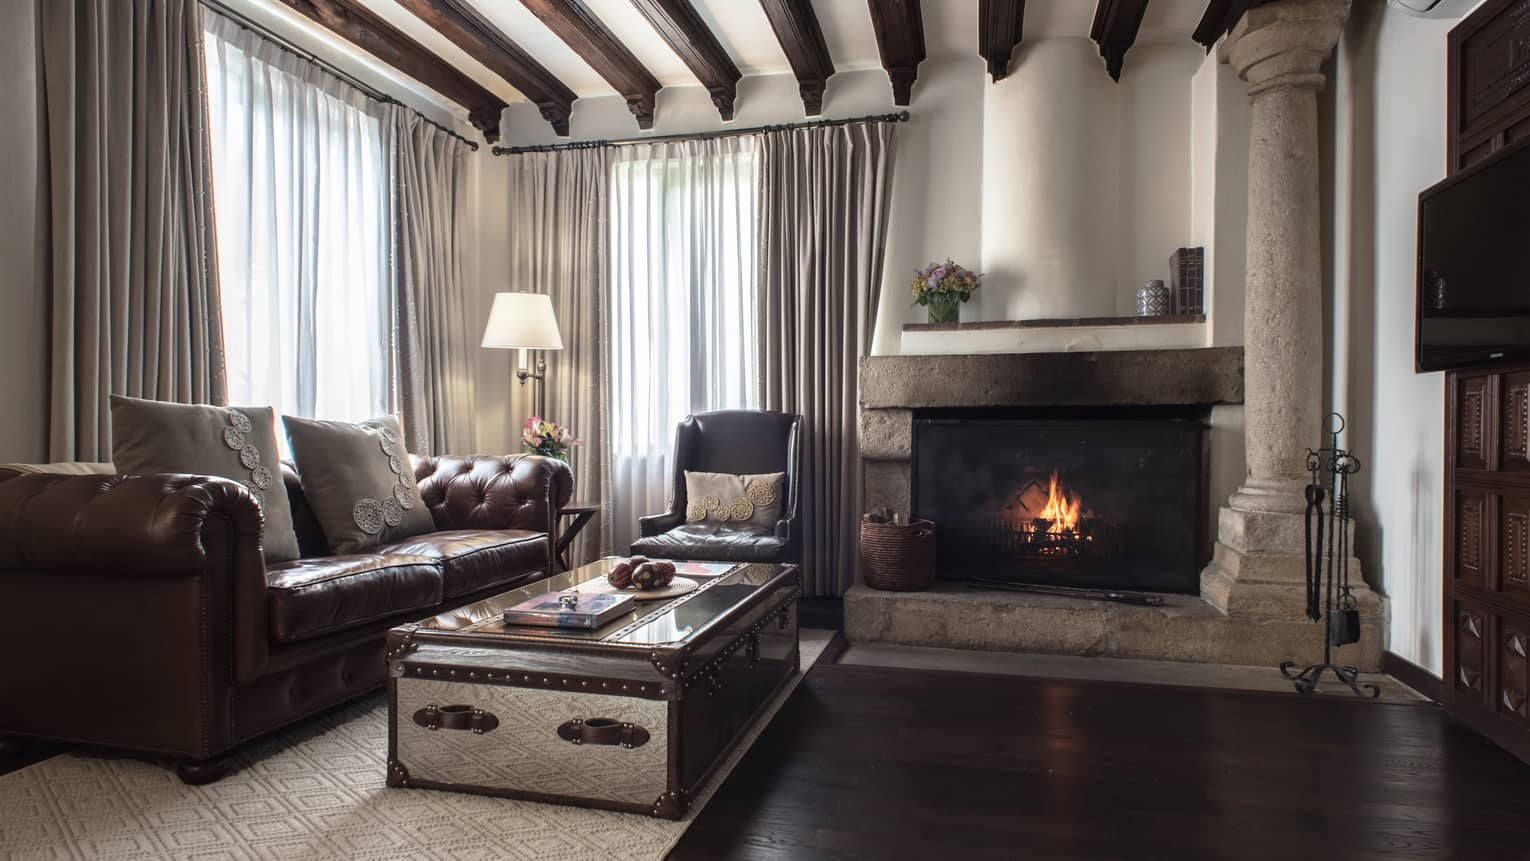 Living room with wooden beams on ceiling, dark wood floors, leather sofa, fireplace